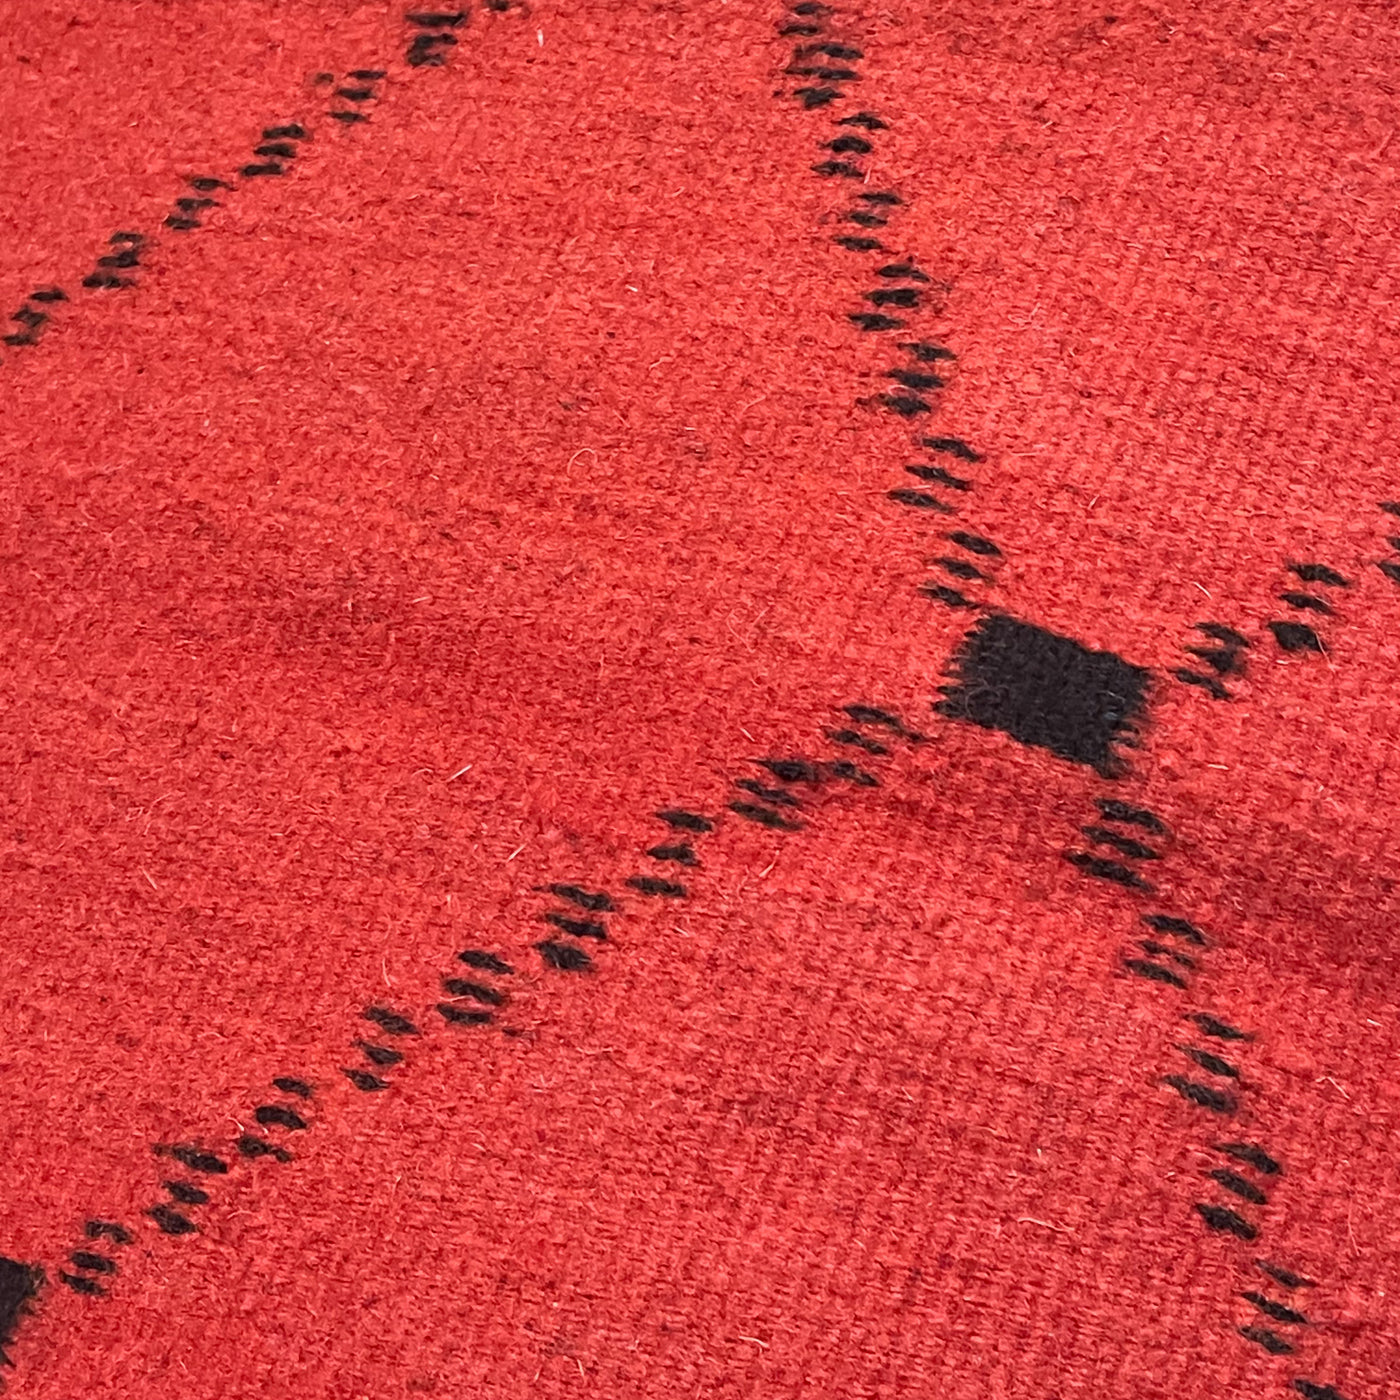 Zapotec Style Handwoven  Indian Weaving Red from Oaxaca - 2.5’ x 5’